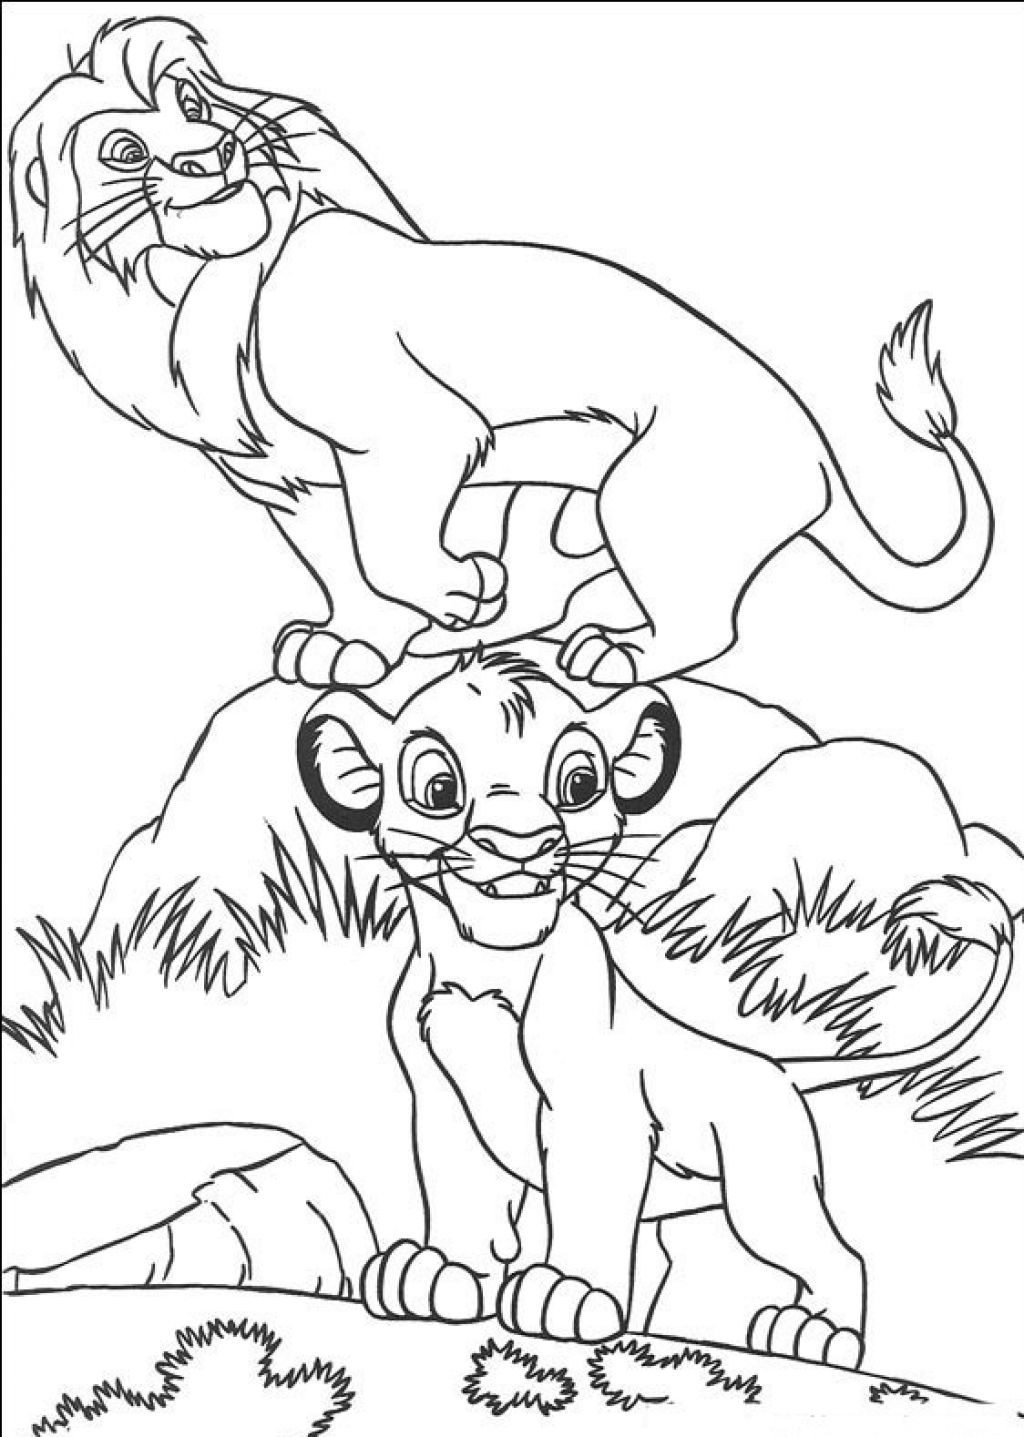 Coloring Pages For Toddlers To Print
 Free Printable Simba Coloring Pages For Kids